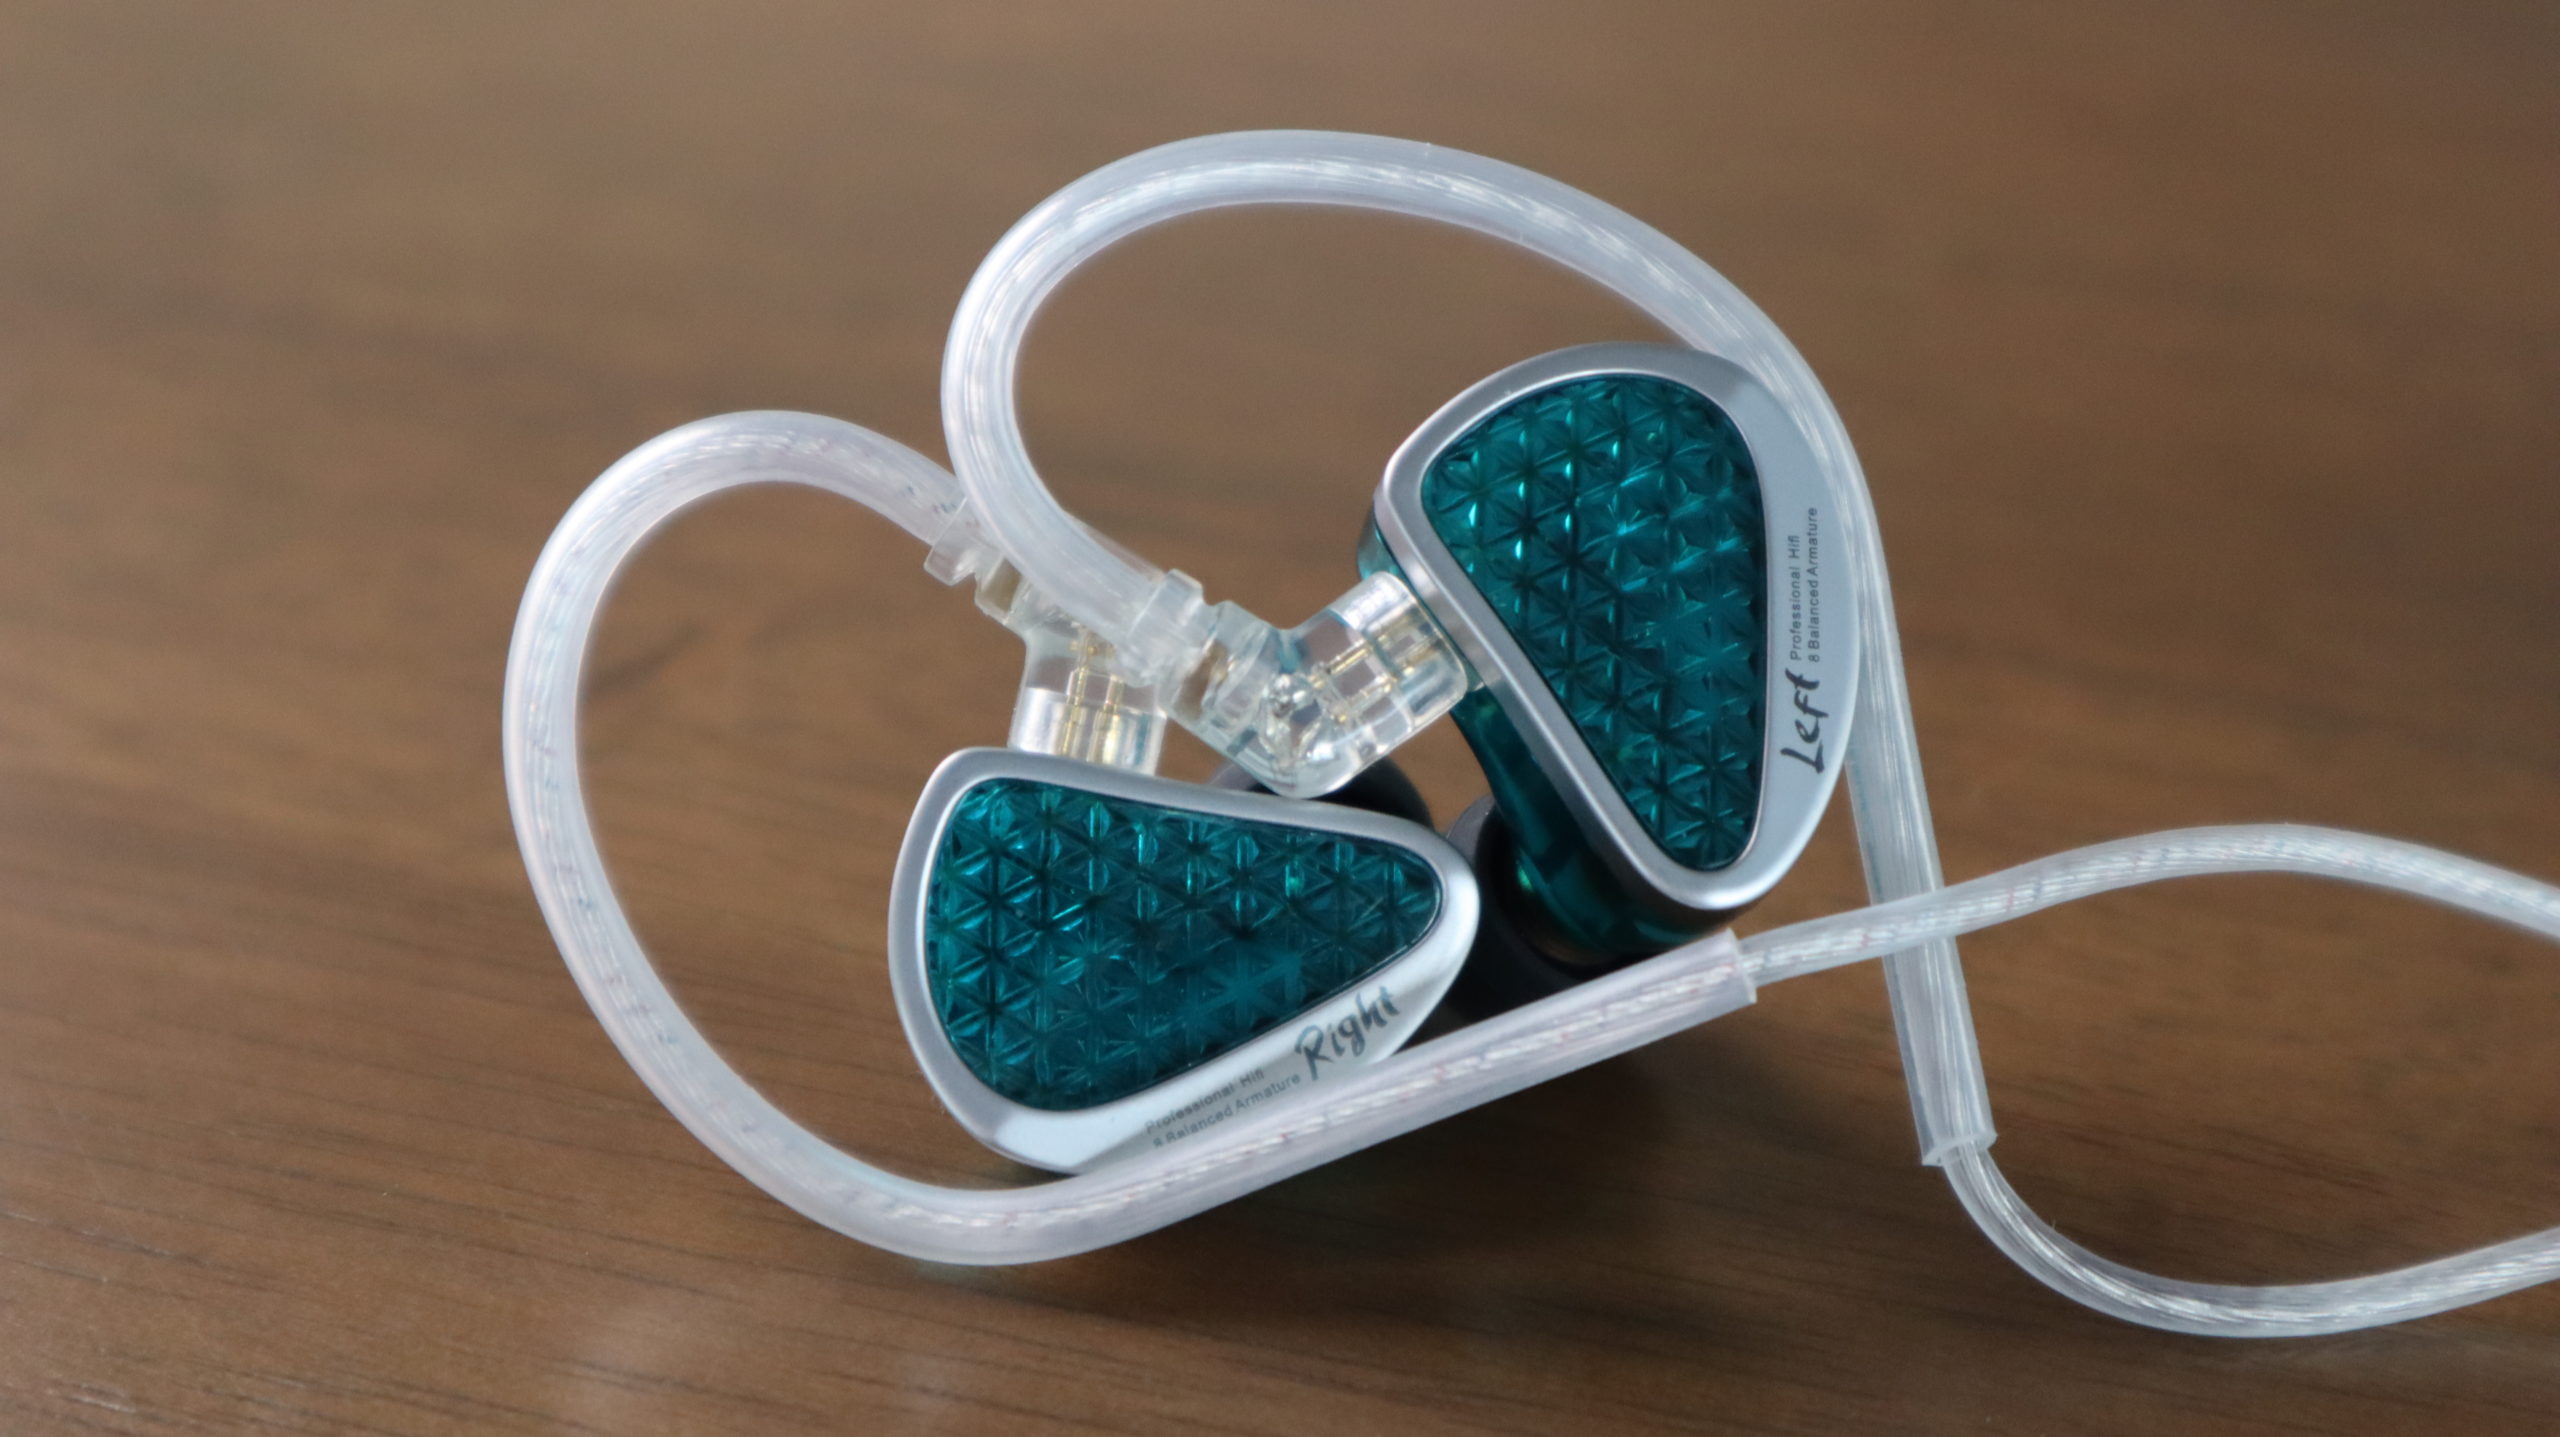 KZ AS16 Pro Earbuds Review: A Chunky Piece Of Audio